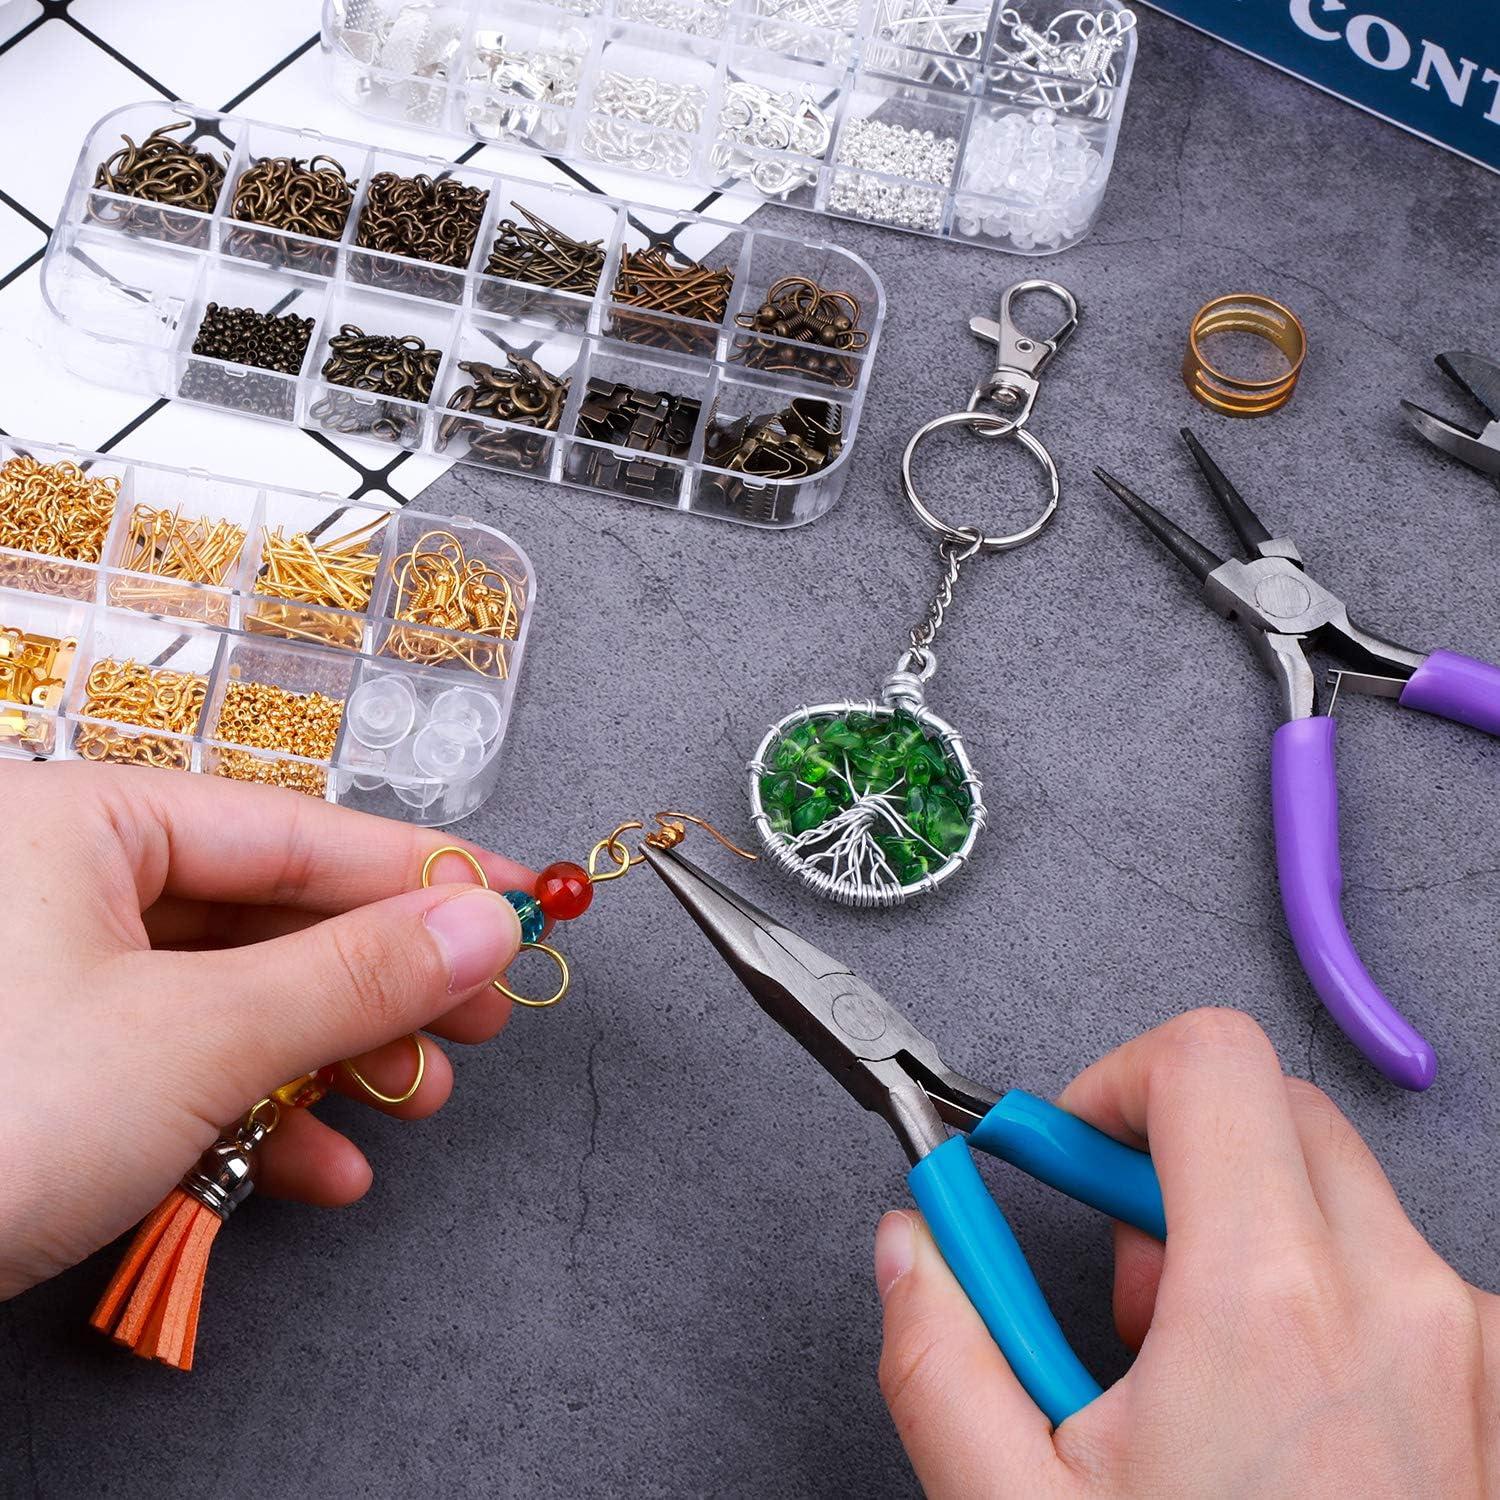 Wire Jewelry Making Kit Keychain Bracelet Necklace Earring Anklet Charm  Fixing Repair Tools Set DIY Craft Supplies 